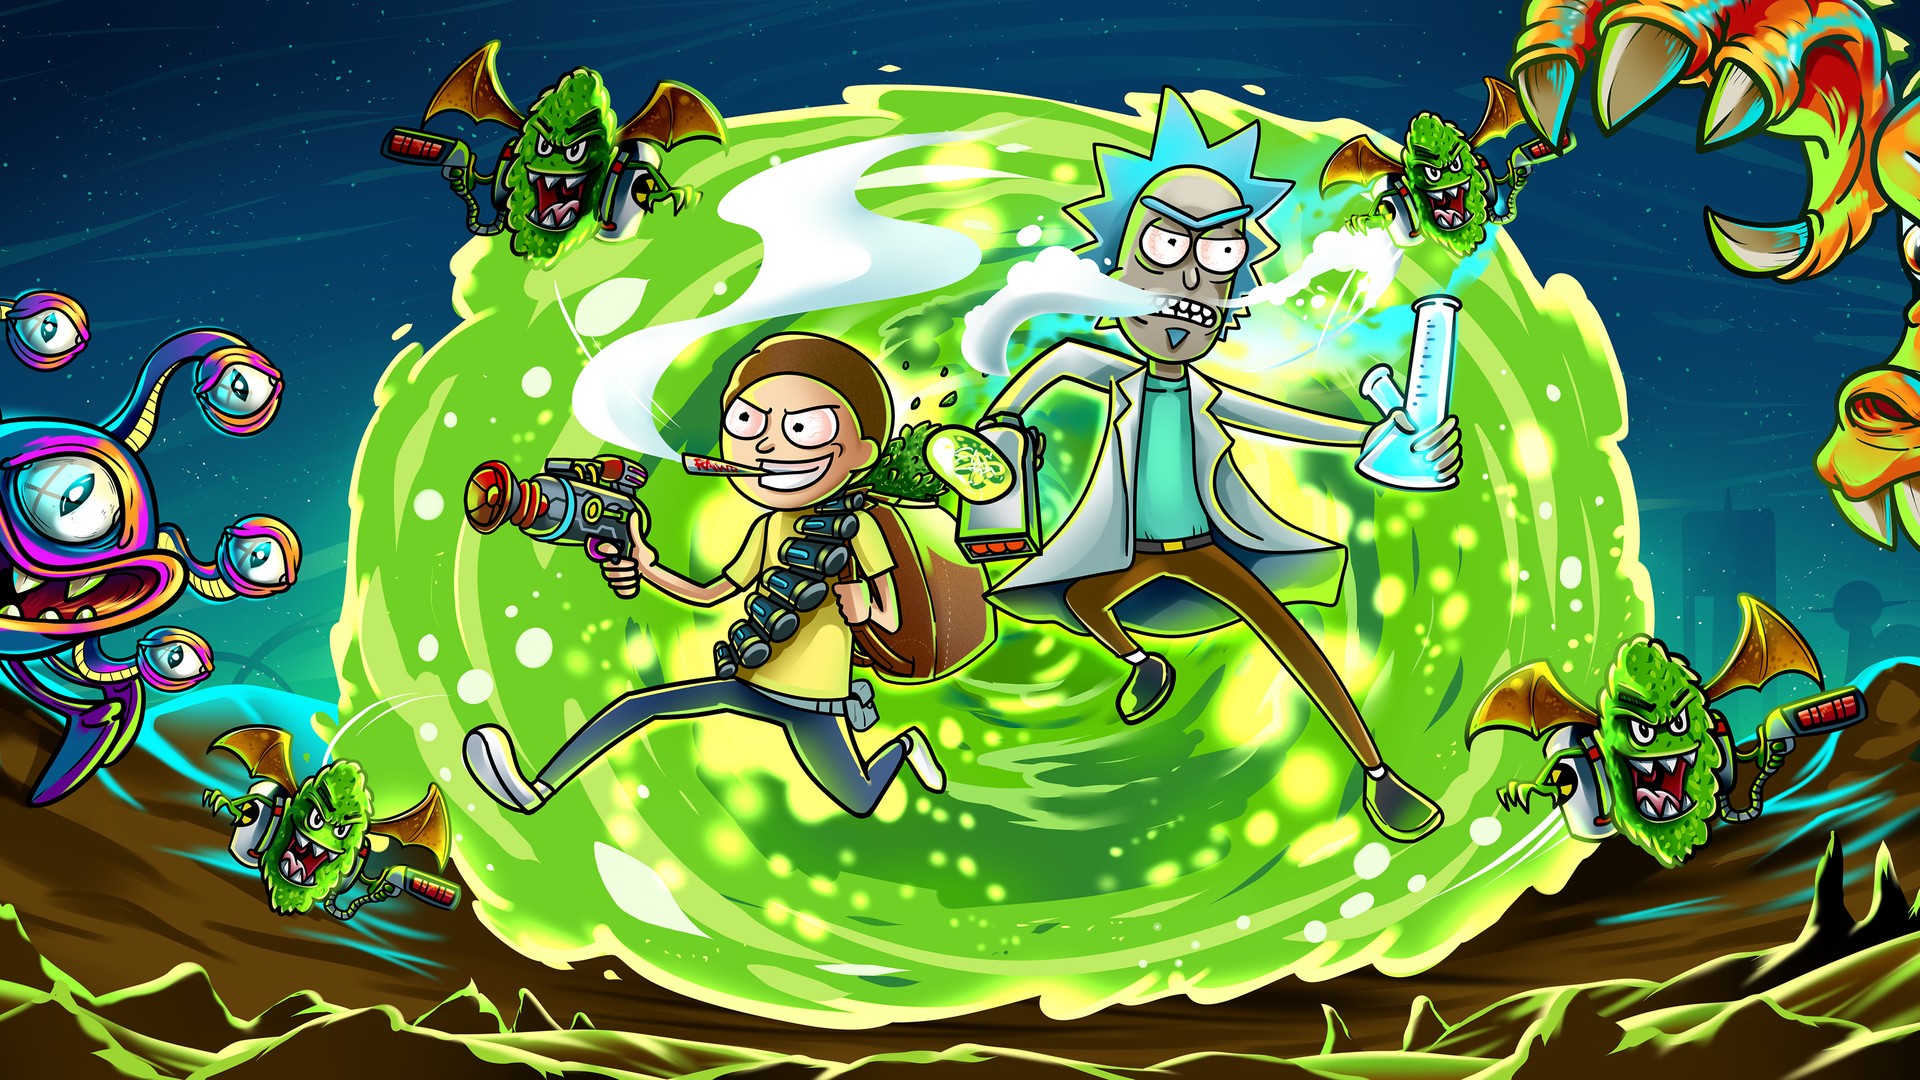 Movie Wallpaper Rick and Morty with high-resolution 1920x1080 pixel. You can use this poster wallpaper for your Desktop Computers, Mac Screensavers, Windows Backgrounds, iPhone Wallpapers, Tablet or Android Lock screen and another Mobile device